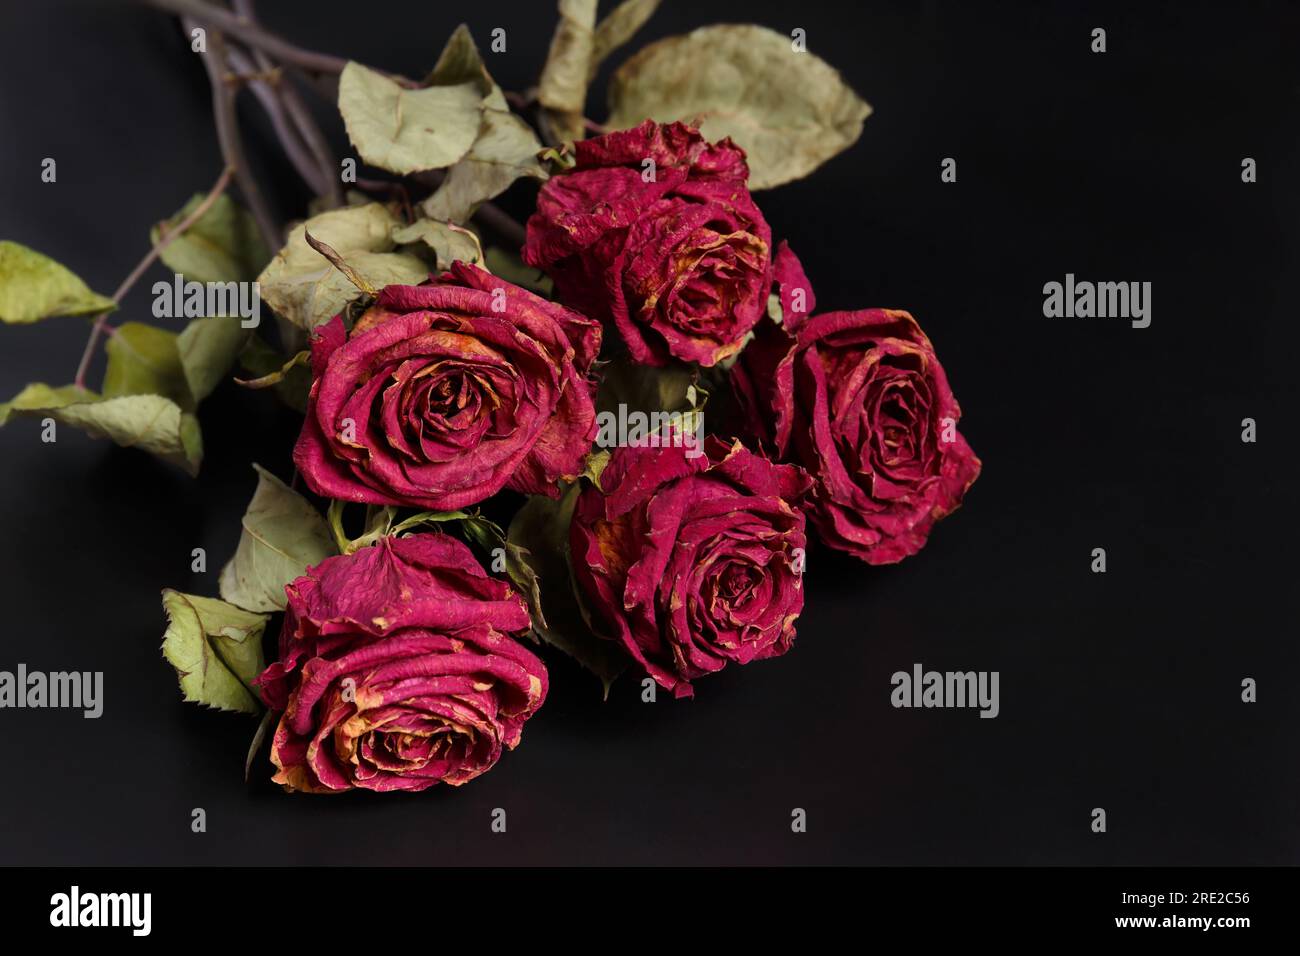 Dry pink roses on a black background. Dead roses close up, copy space. The concept of loneliness, age, sadness, old age, unhappy love, loss. Stock Photo